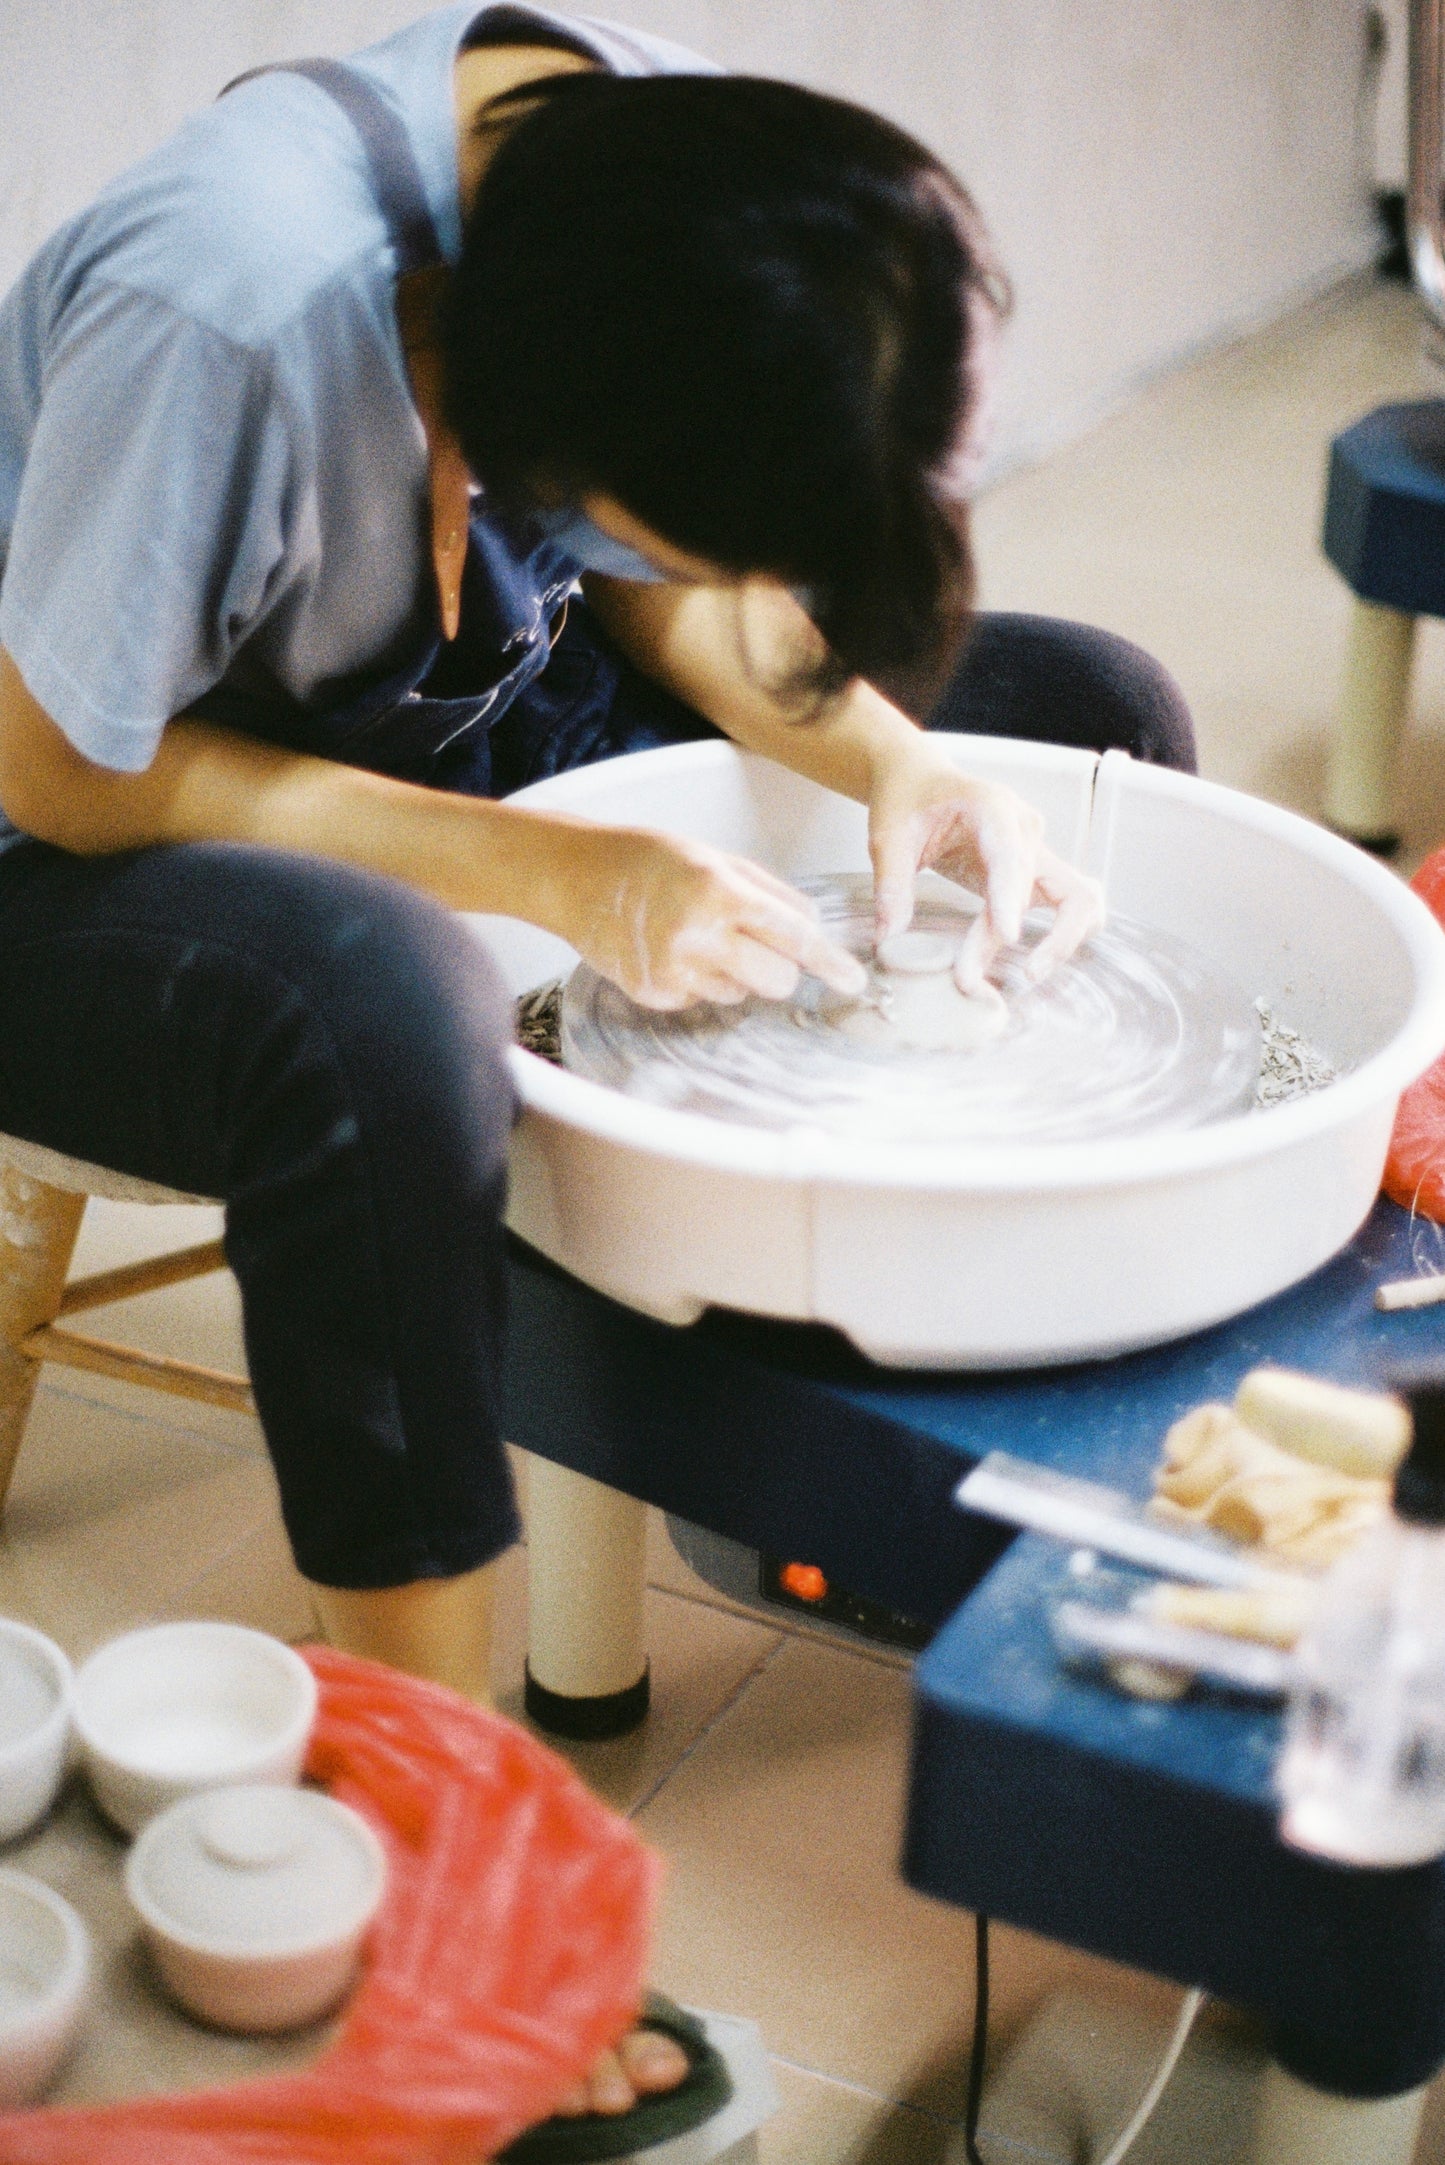 POTTERY THROWING COURSE (4 CLASSES)